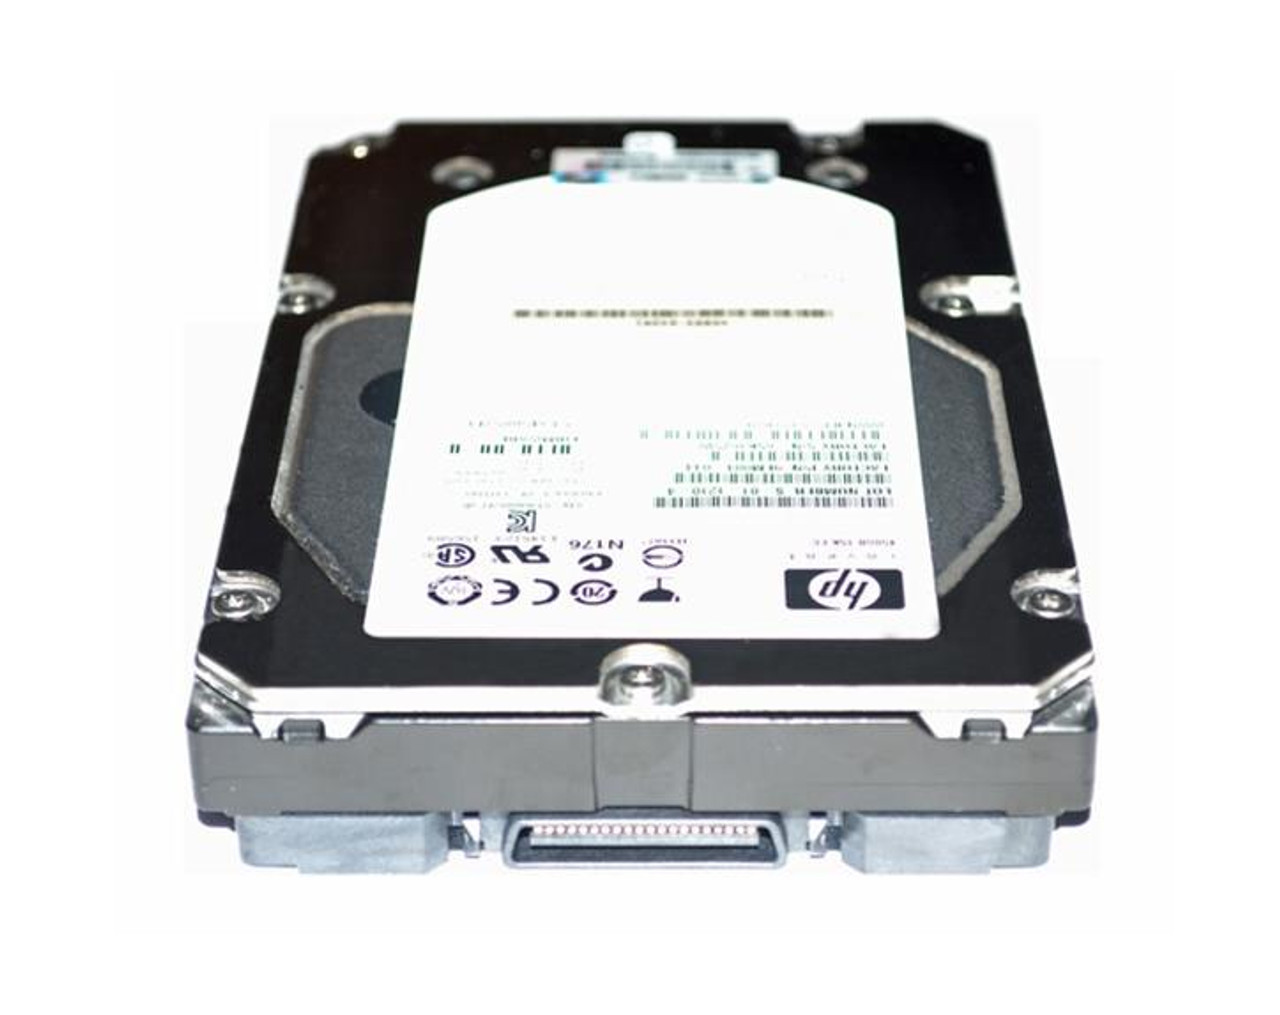 RP001233453 HP 400GB 10000RPM Fibre Channel 4Gbps Dual Port Hot Swap 3.5-inch Internal Hard Drive for StorageWorks EVA5000